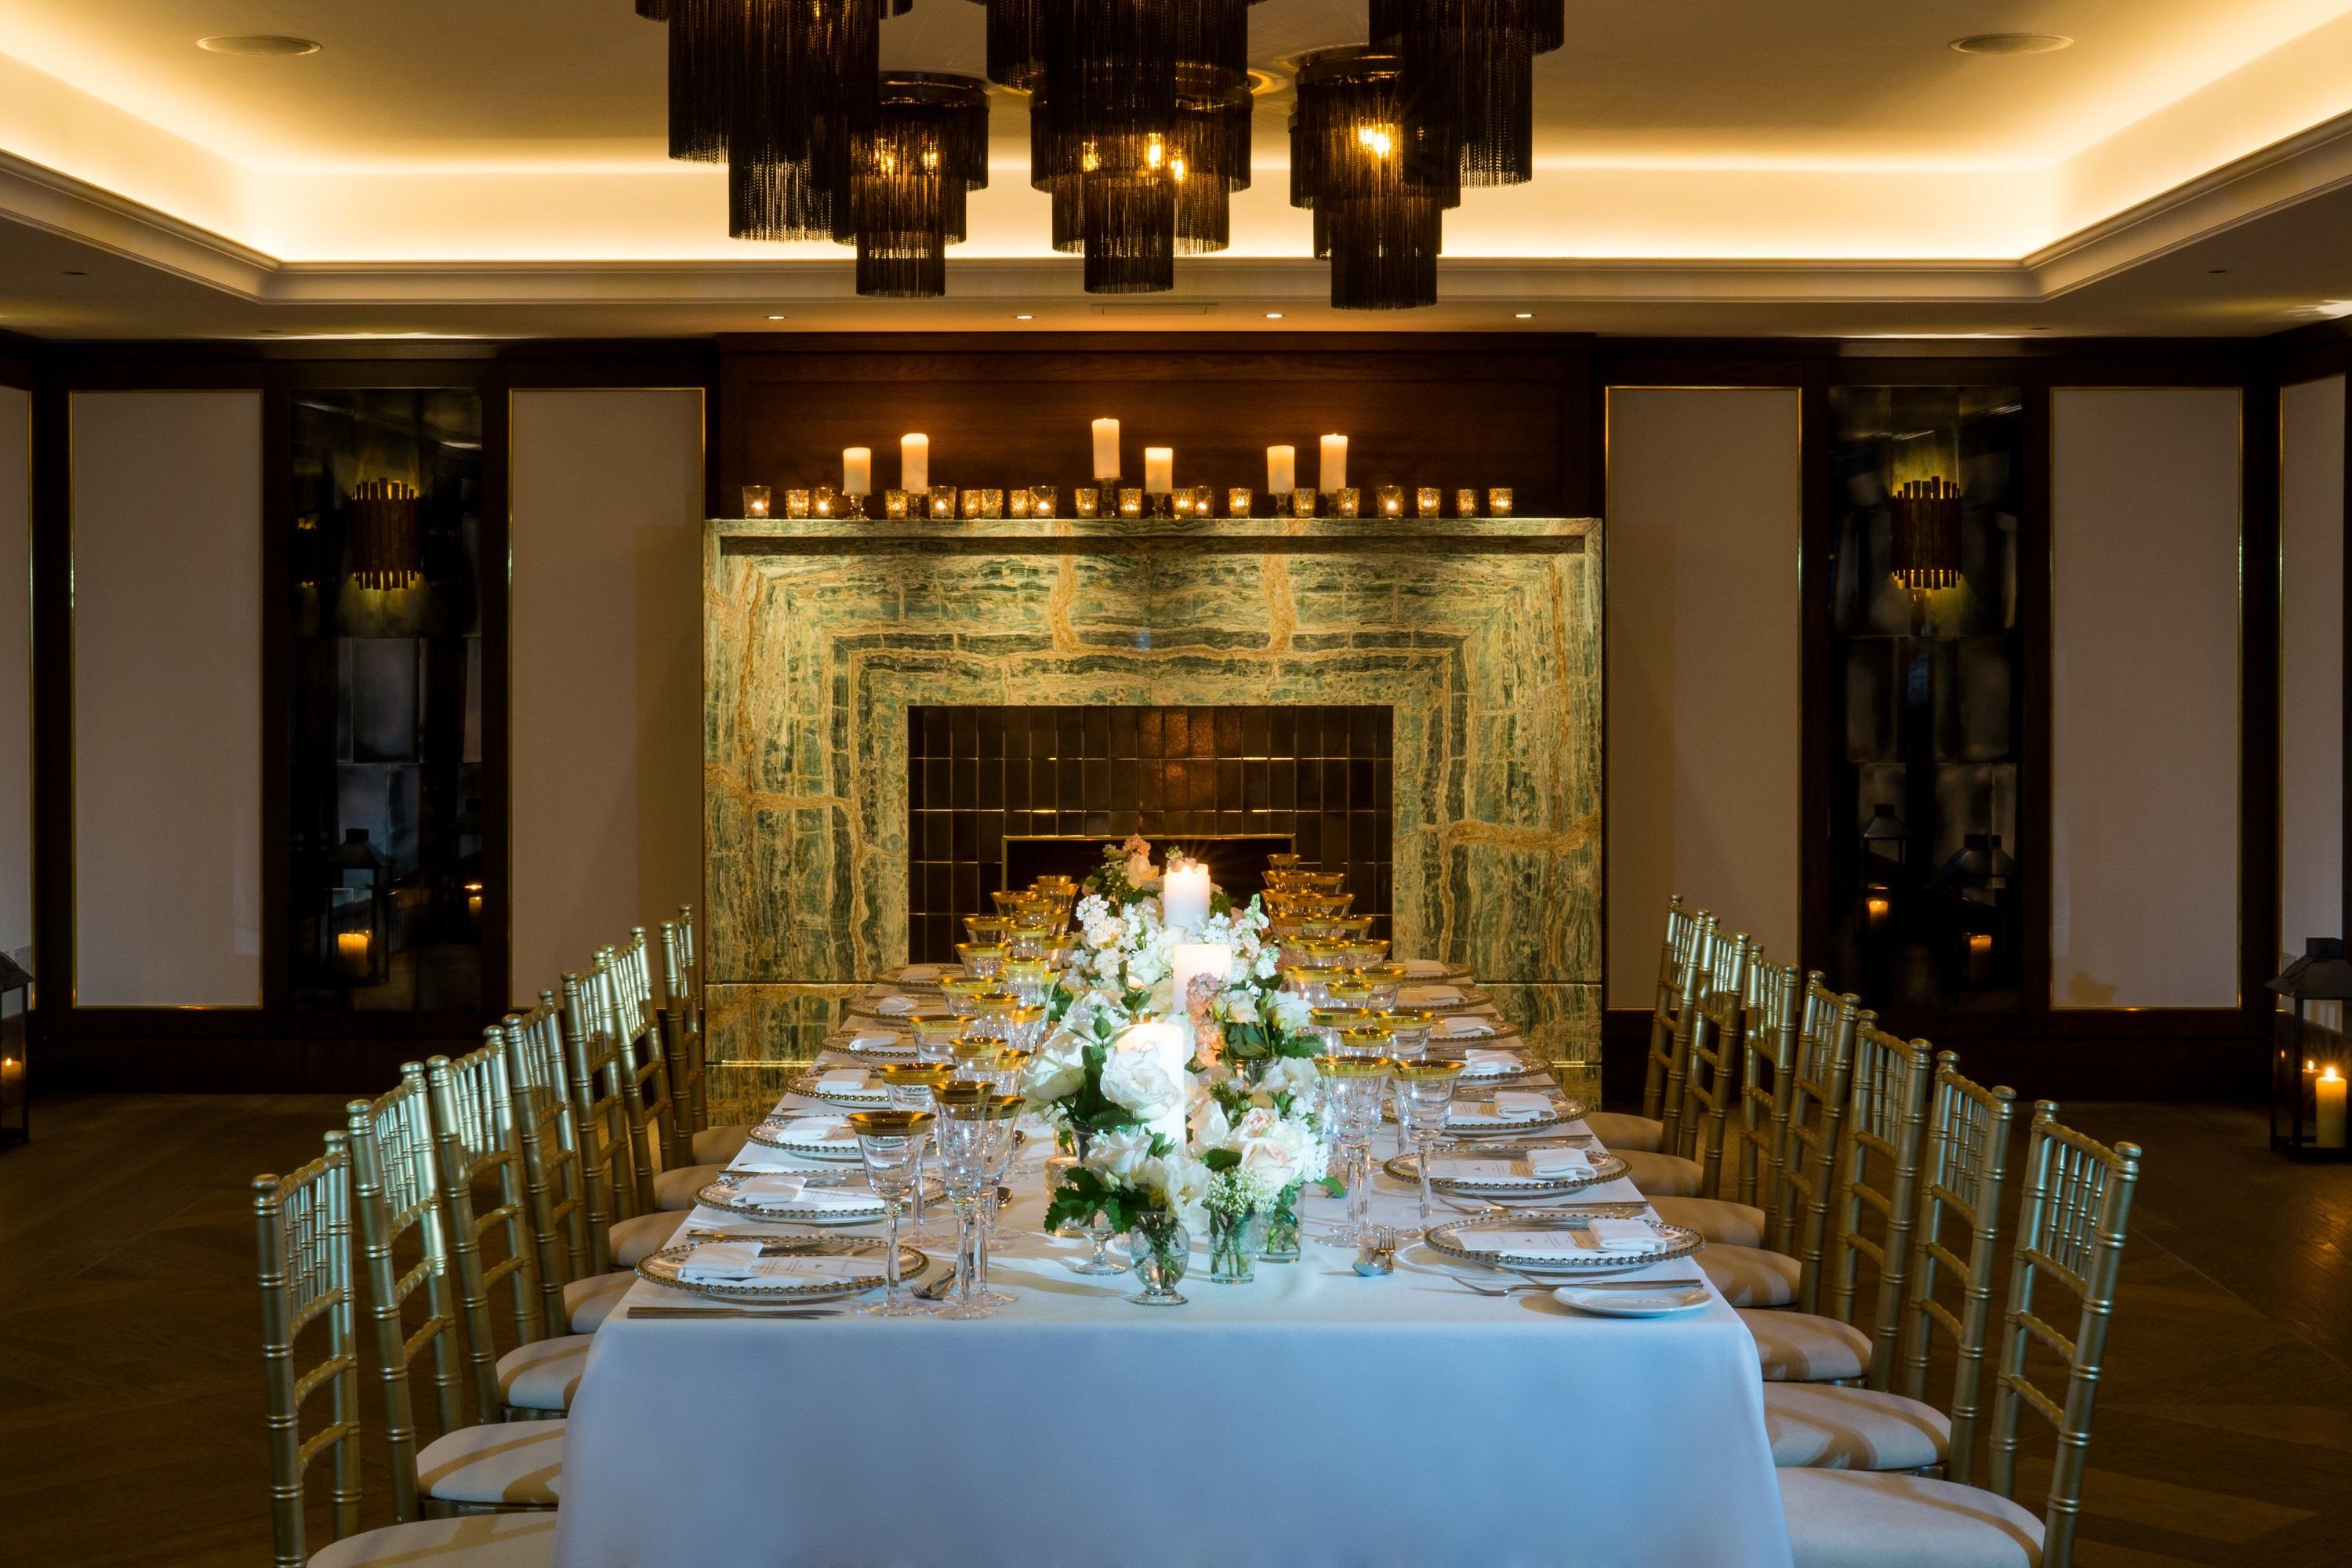 The May Fair Hotel, Private Dining Room photo #3